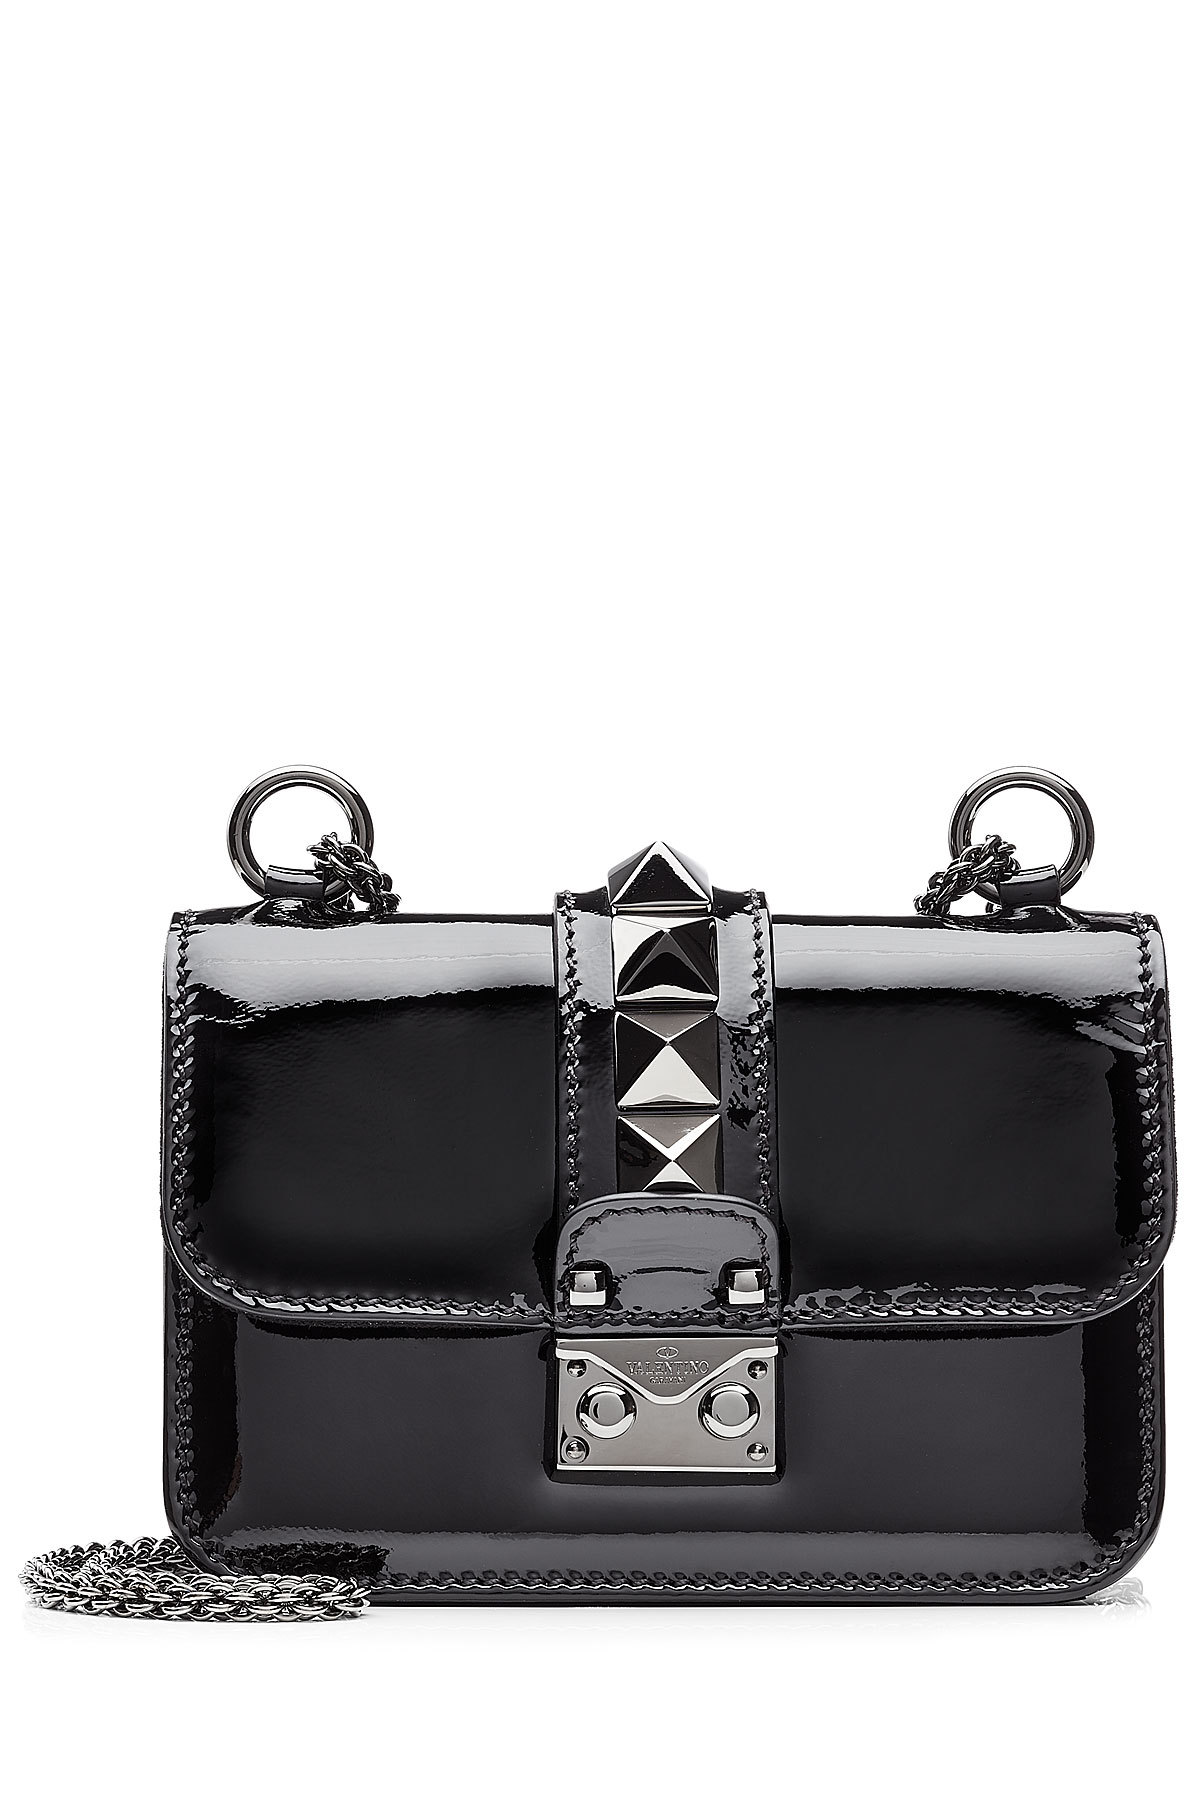 Black Patent Leather Bags | IQS Executive